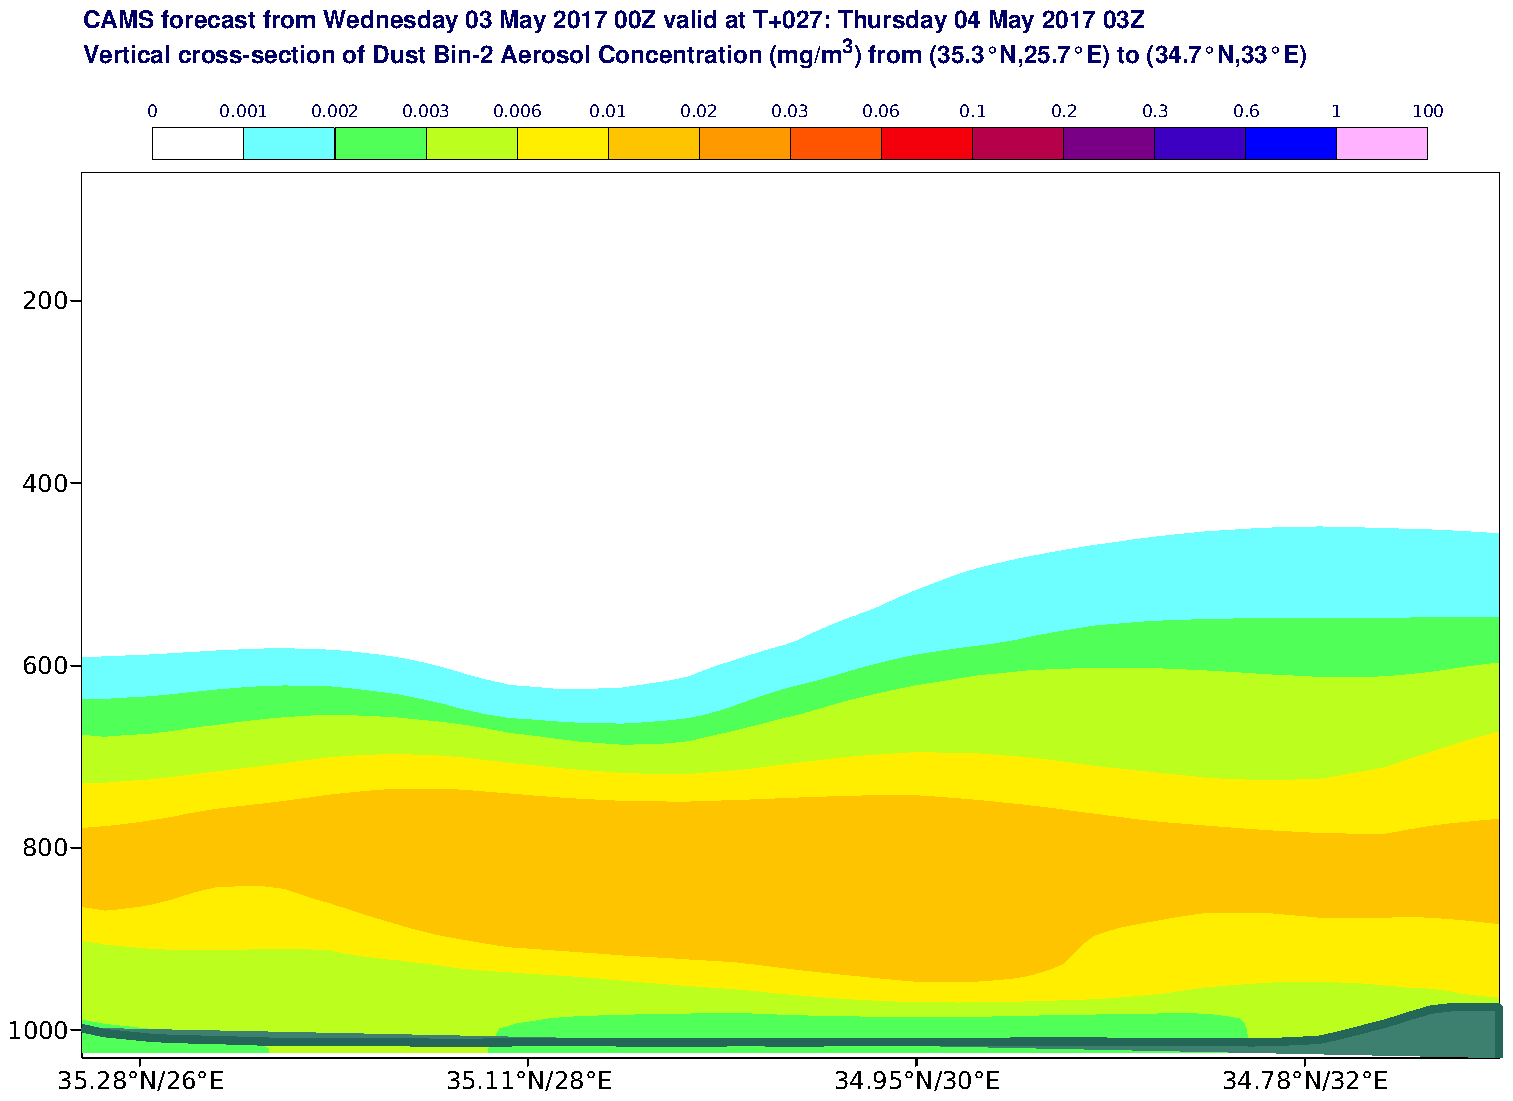 Vertical cross-section of Dust Bin-2 Aerosol Concentration (mg/m3) valid at T27 - 2017-05-04 03:00